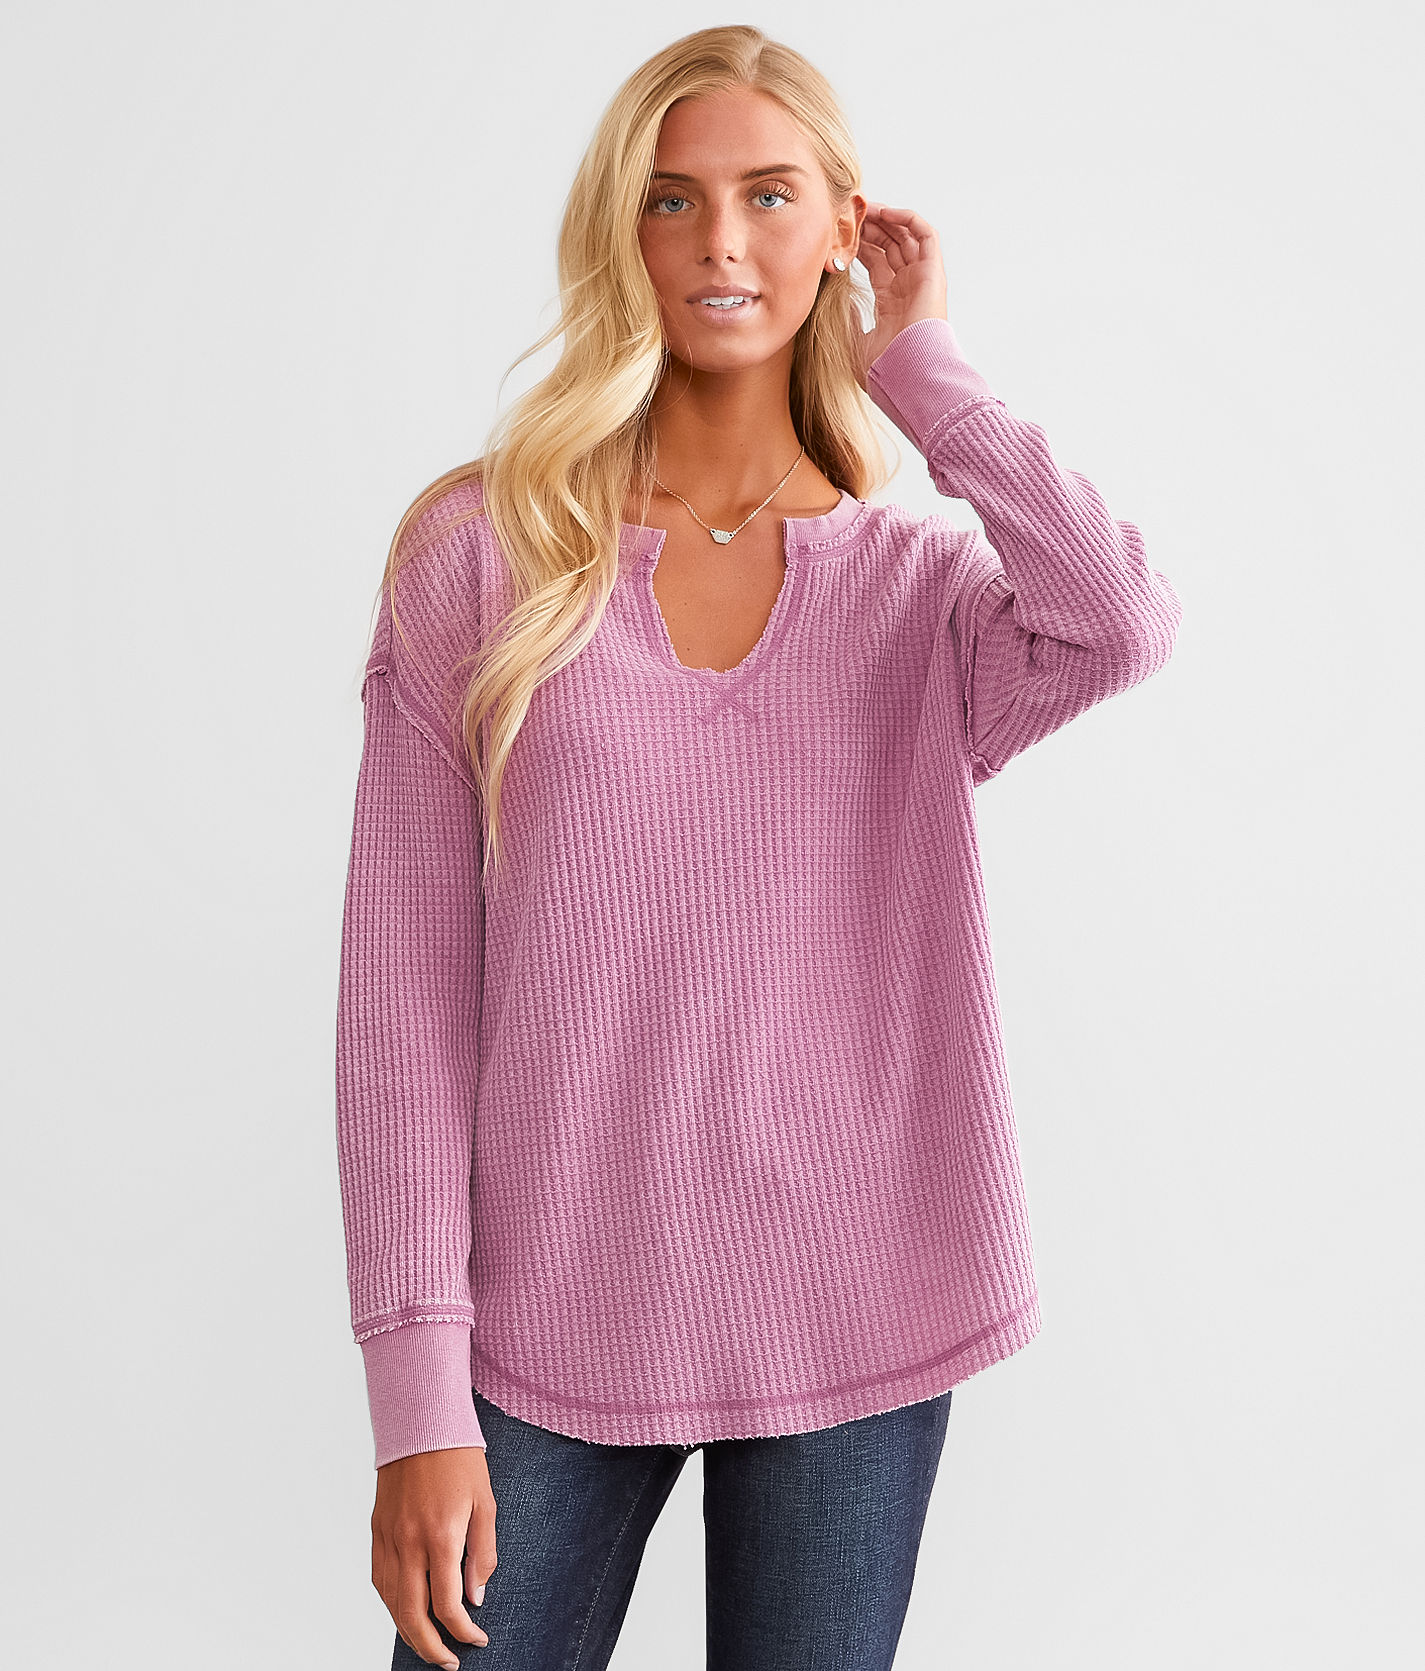 White Crow Shelly Waffle Knit Thermal Top - Women's Shirts 